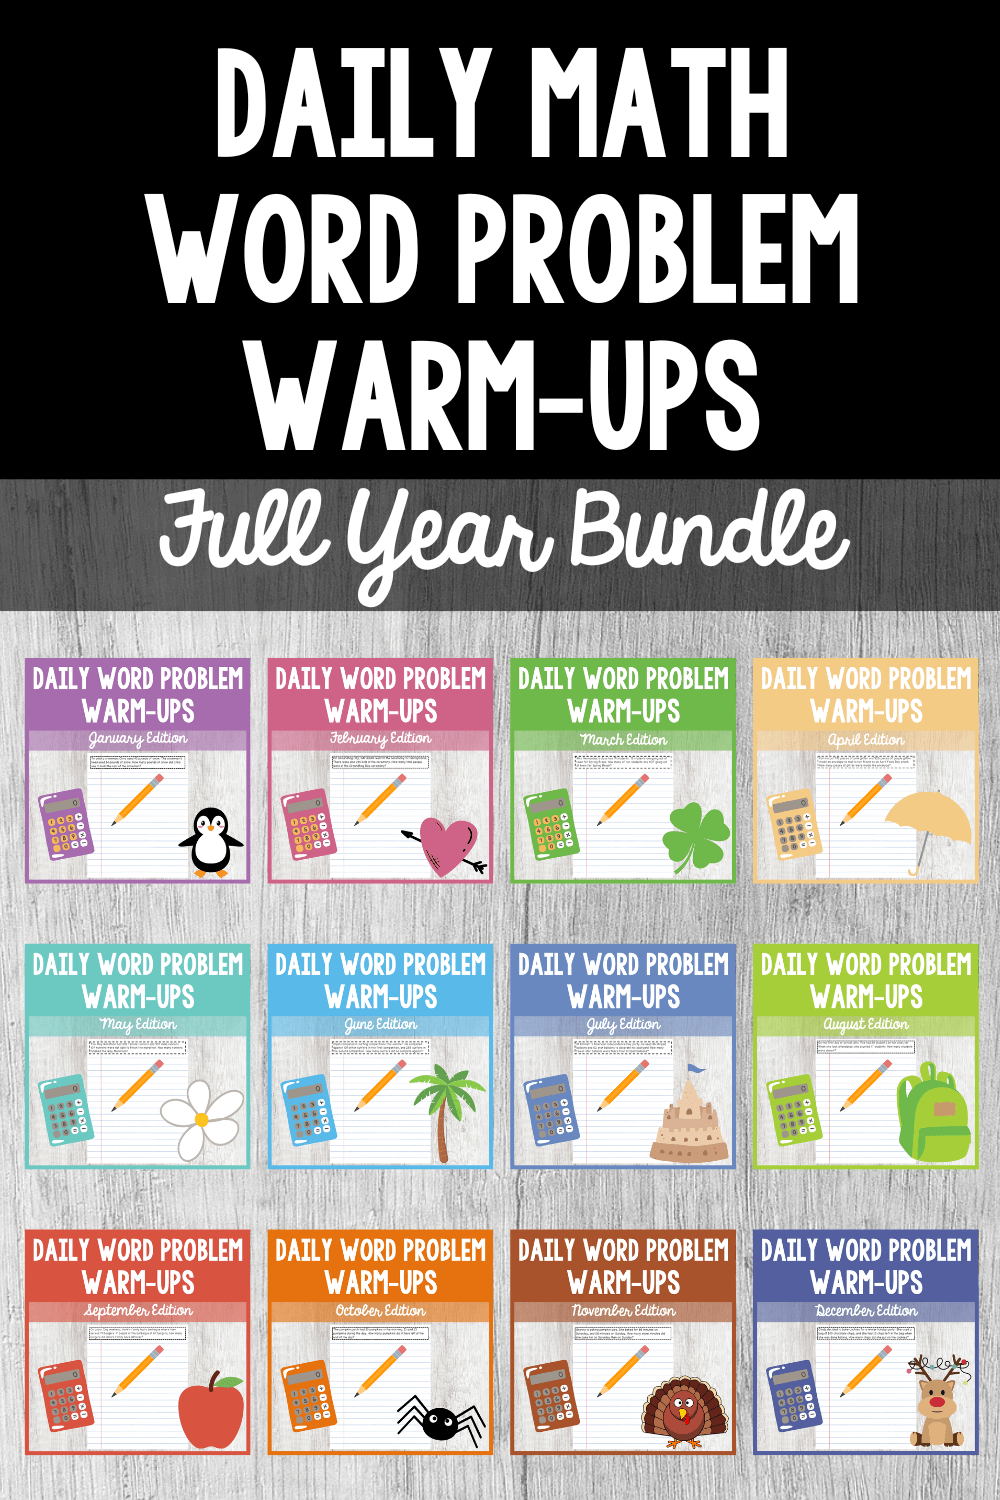 daily math word problem warm-ups full year bundle monthly covers in a grid